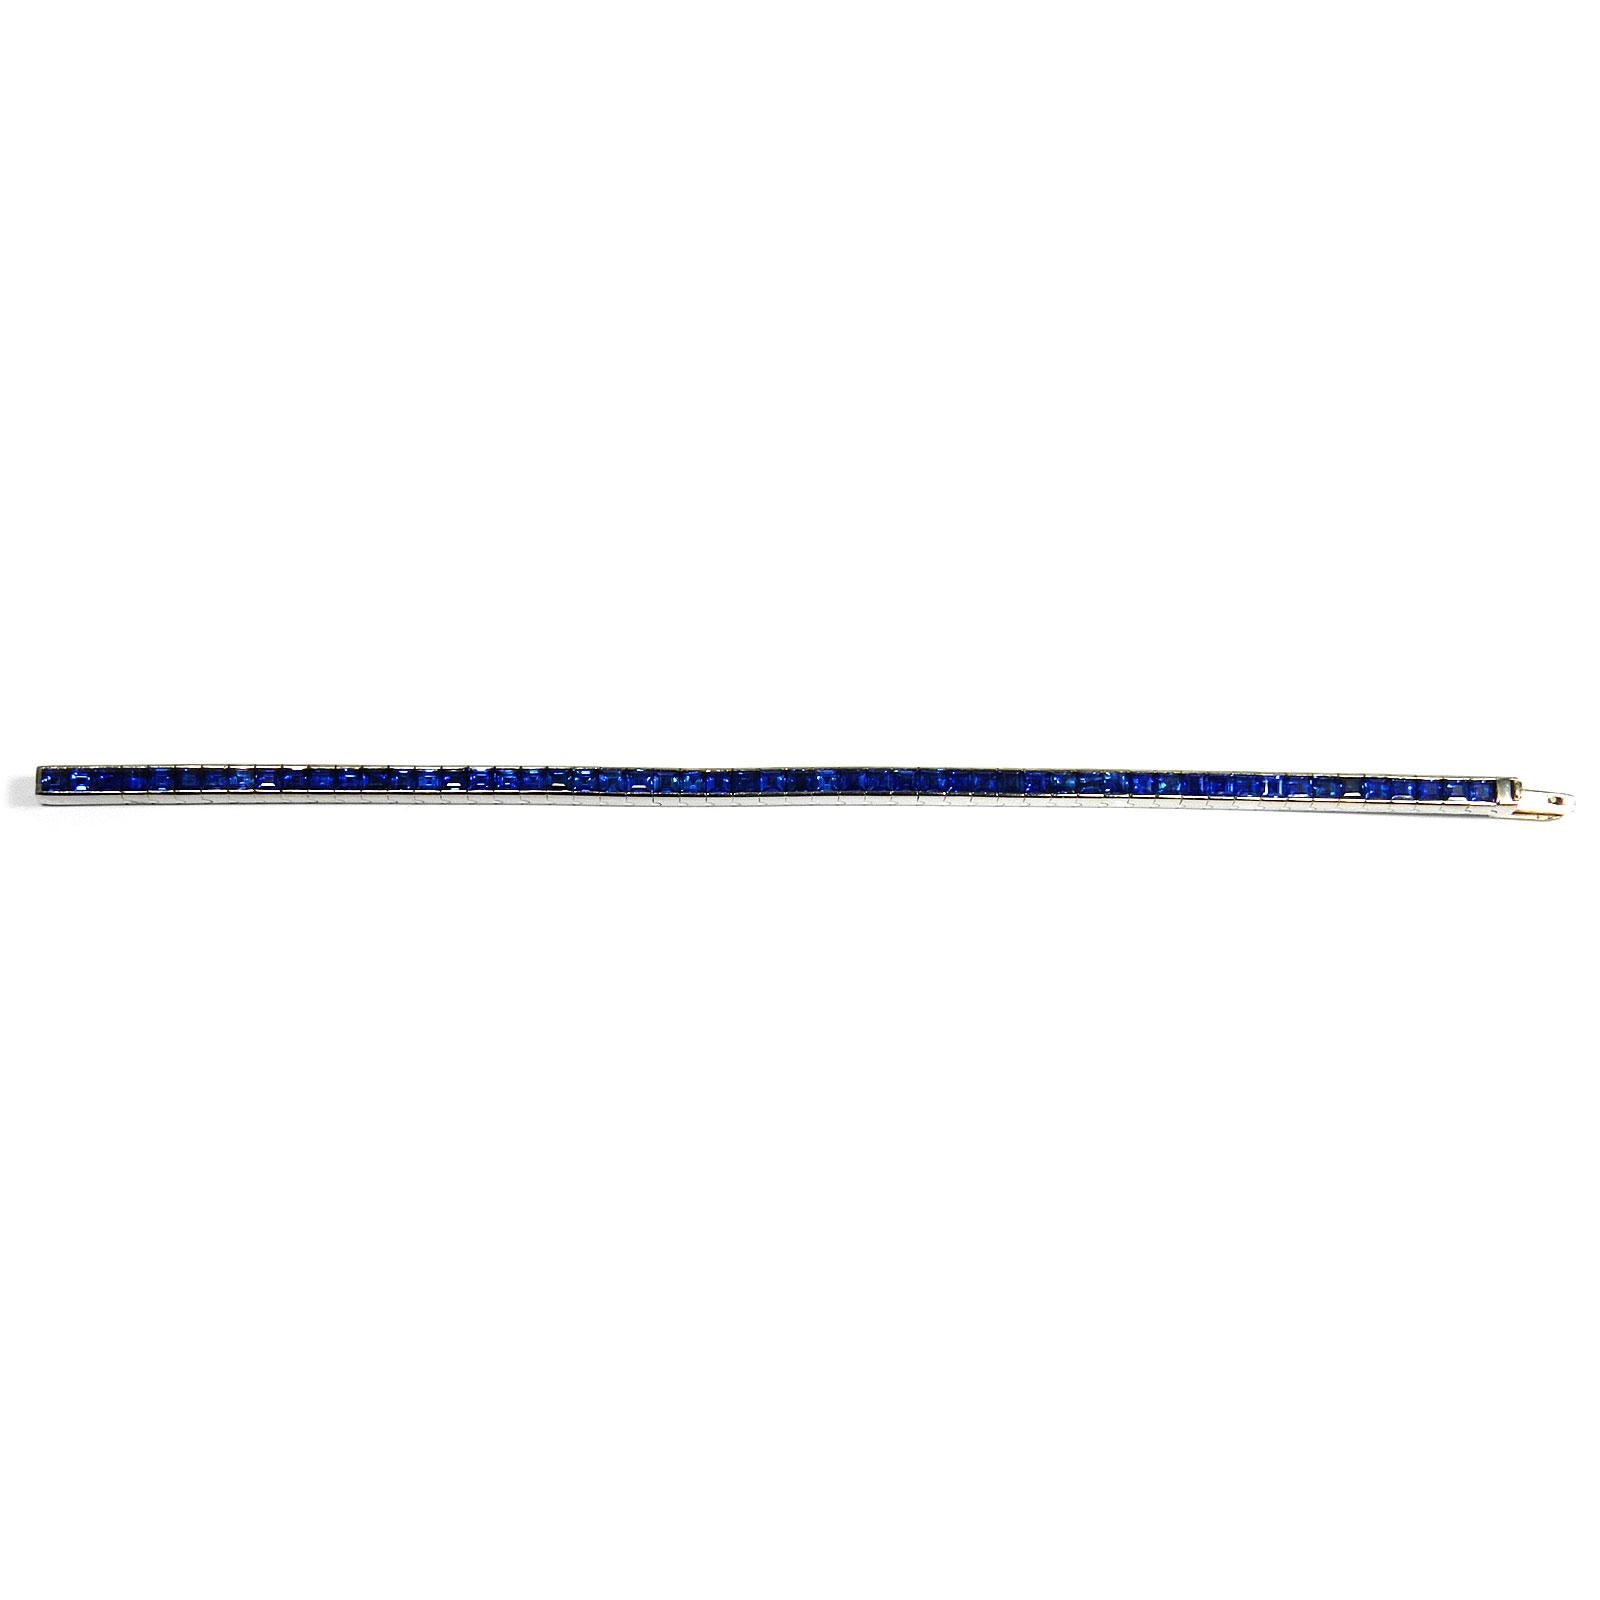 11 ct Natural Blue Sapphire Tennis Line Bracelet in 18K White Gold

Luxurious, flexible line bracelet with 55 natural, cornflower blue sapphires, totaling approx. 11 ct in a white golden channel setting, secured with concealed insert clasp.

750